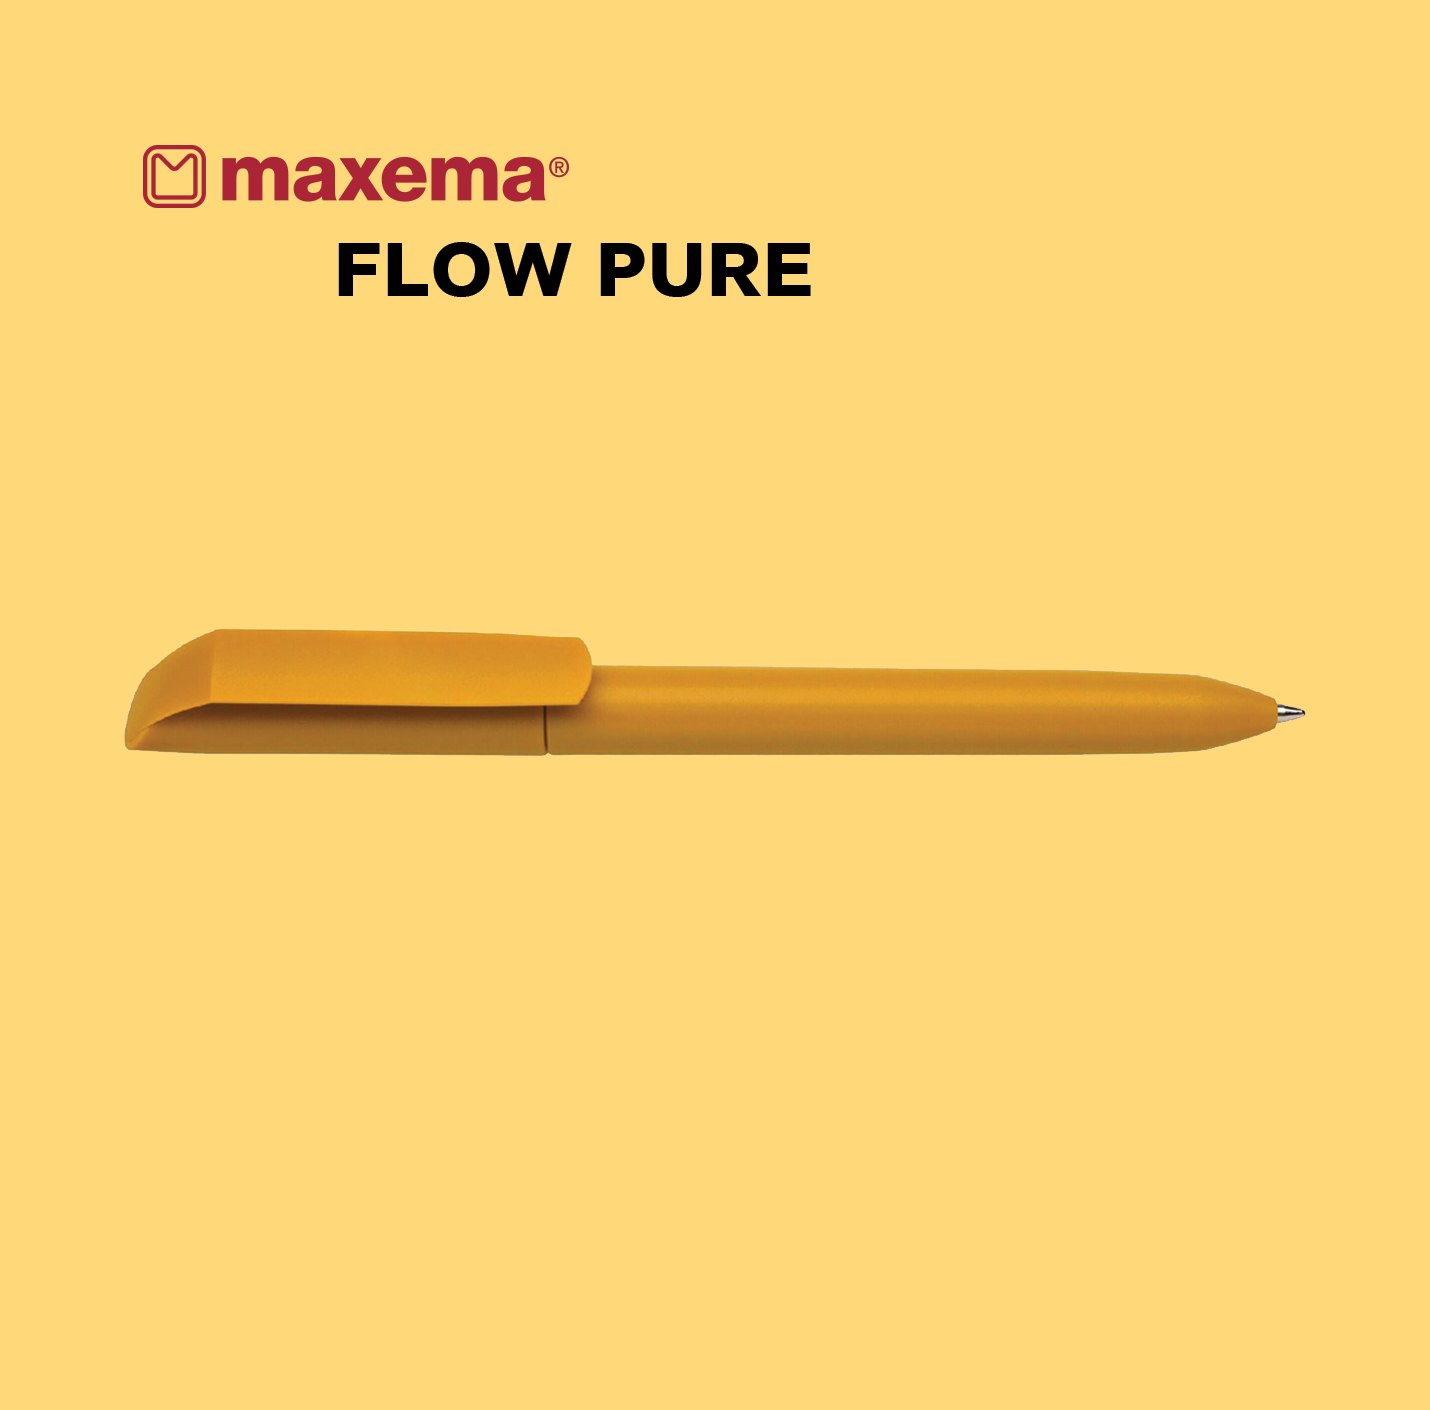 Maxema Pens Flow Pure